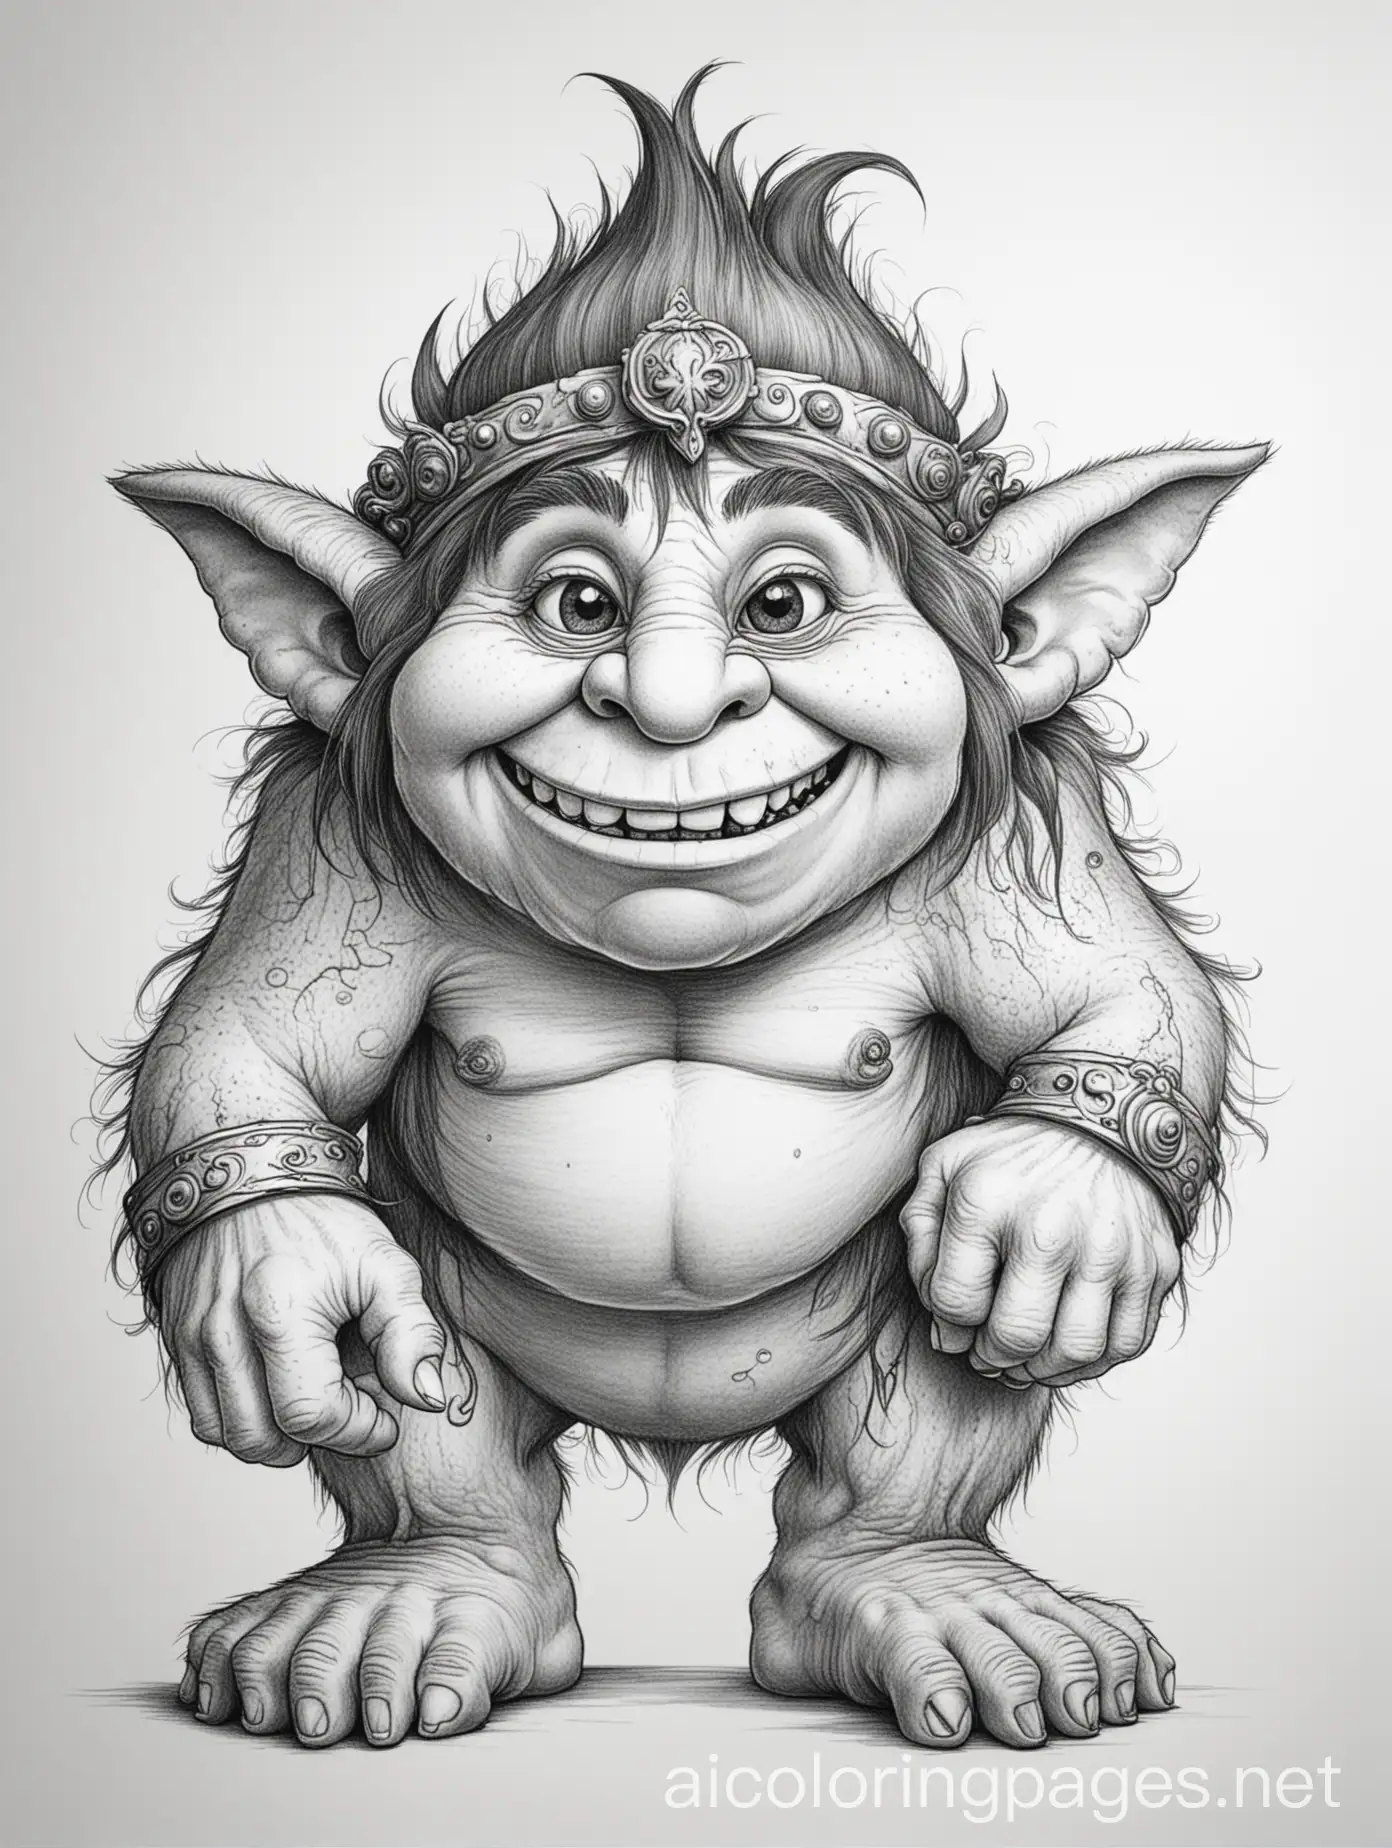 Slobbery-Troll-Coloring-Page-Simple-Line-Art-on-White-Background